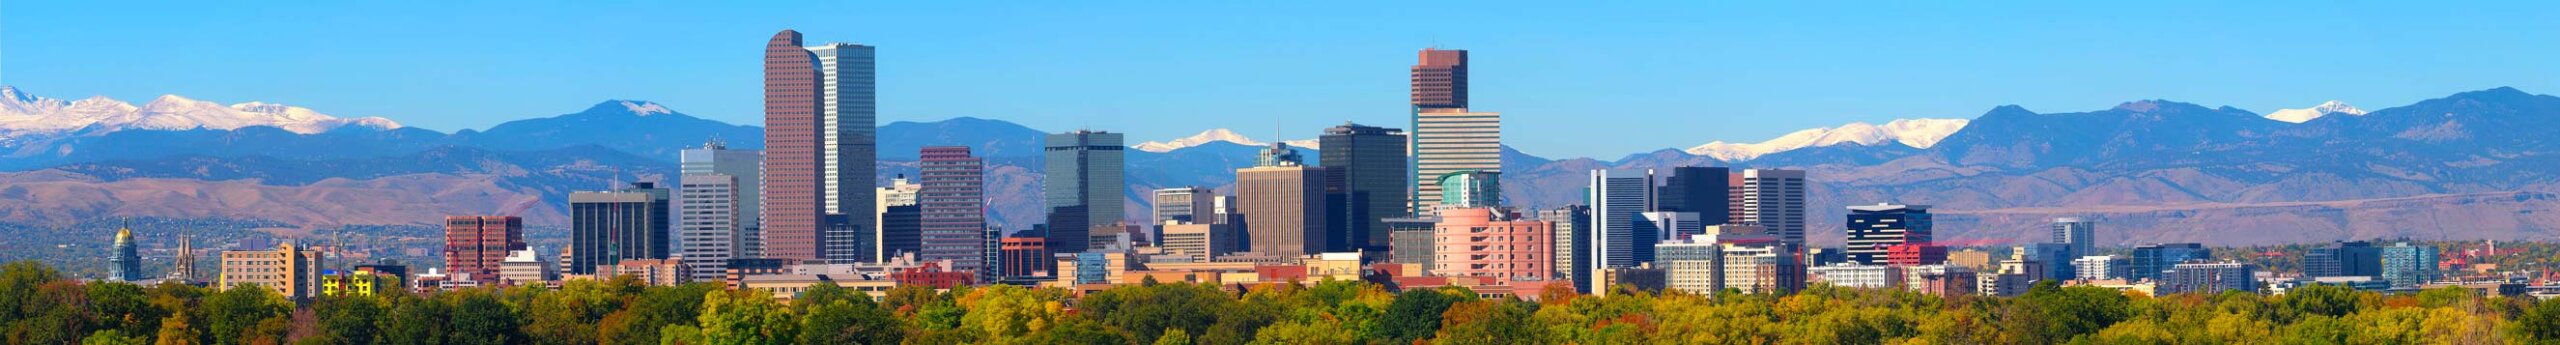 Denver Skyline with the rocky mountains in the background